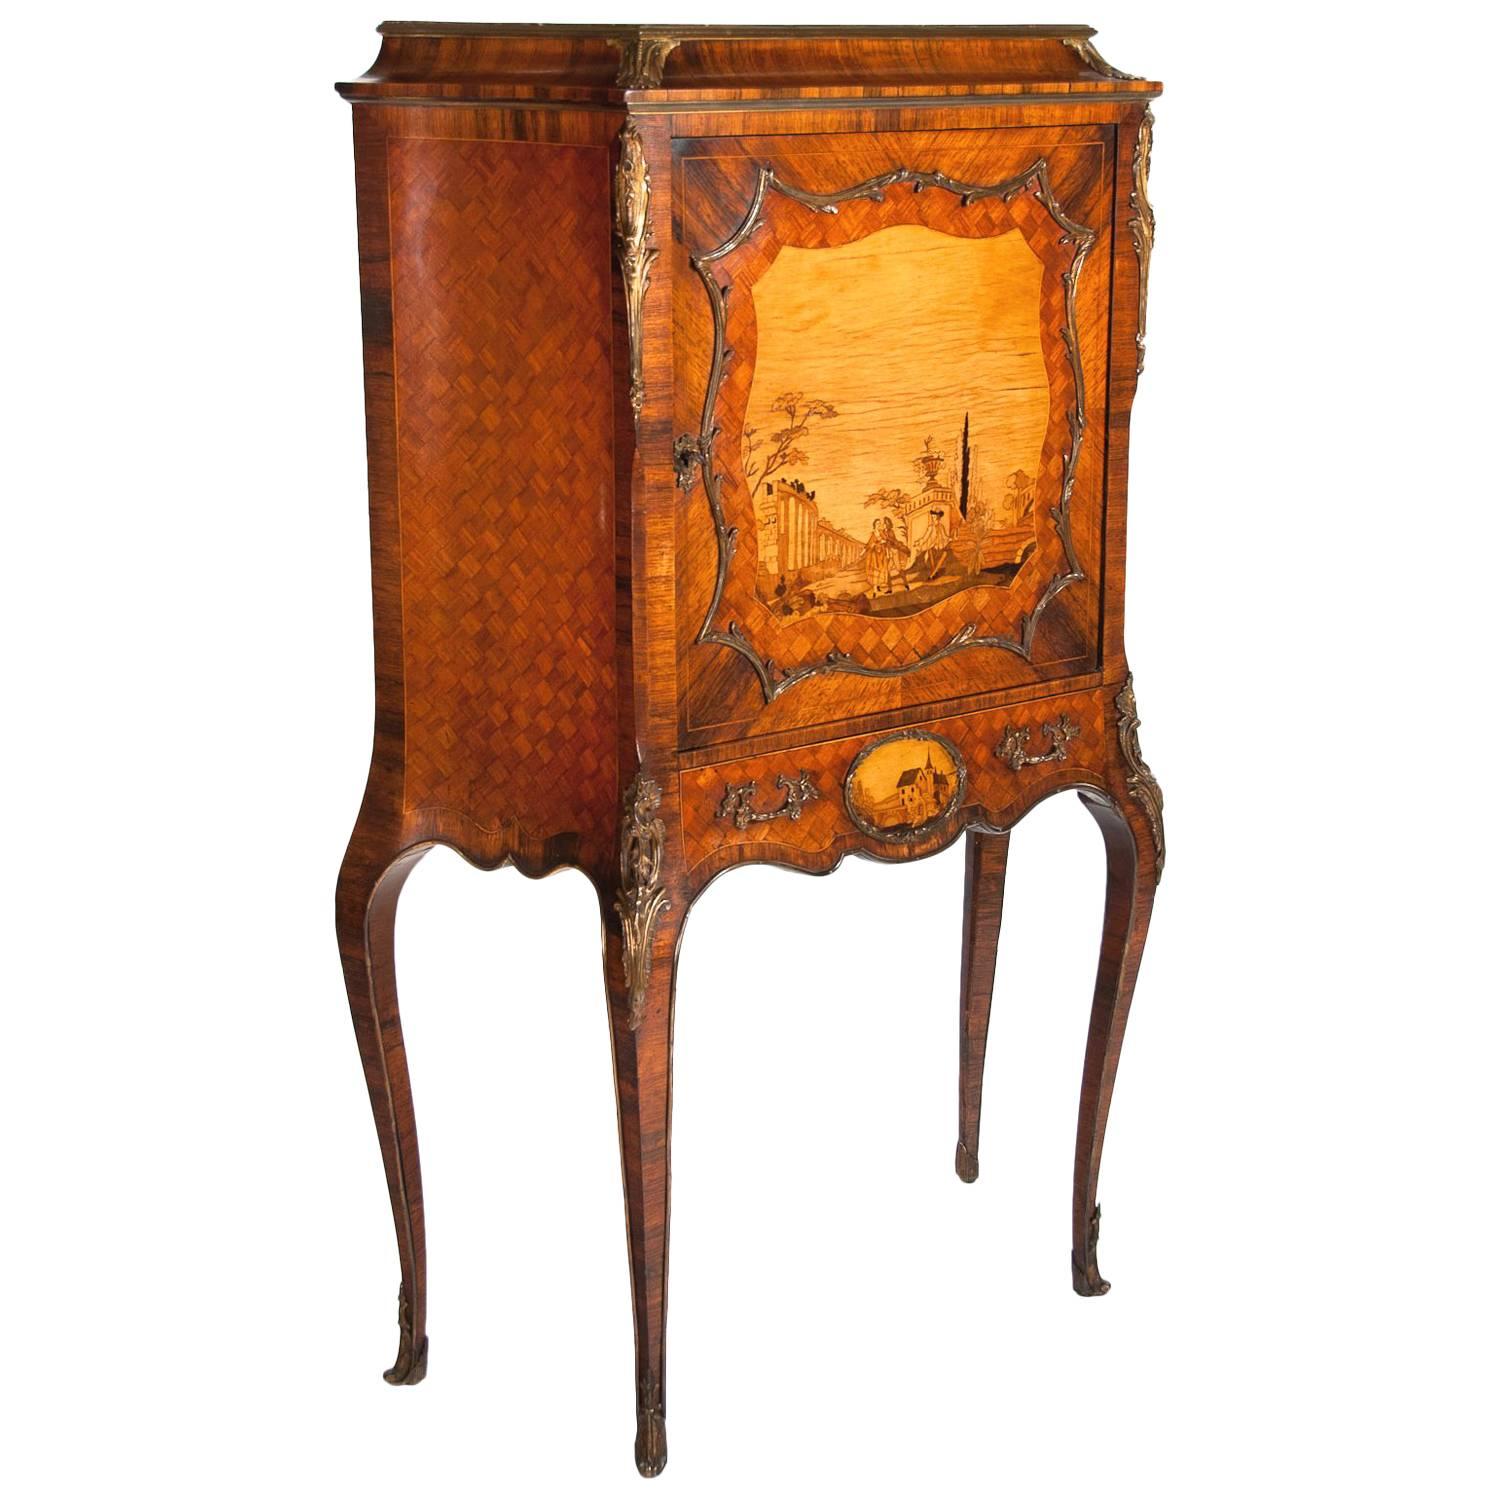 Extremely Fine Shaped 19th Century French Marble-Topped Marquetry Cabinet